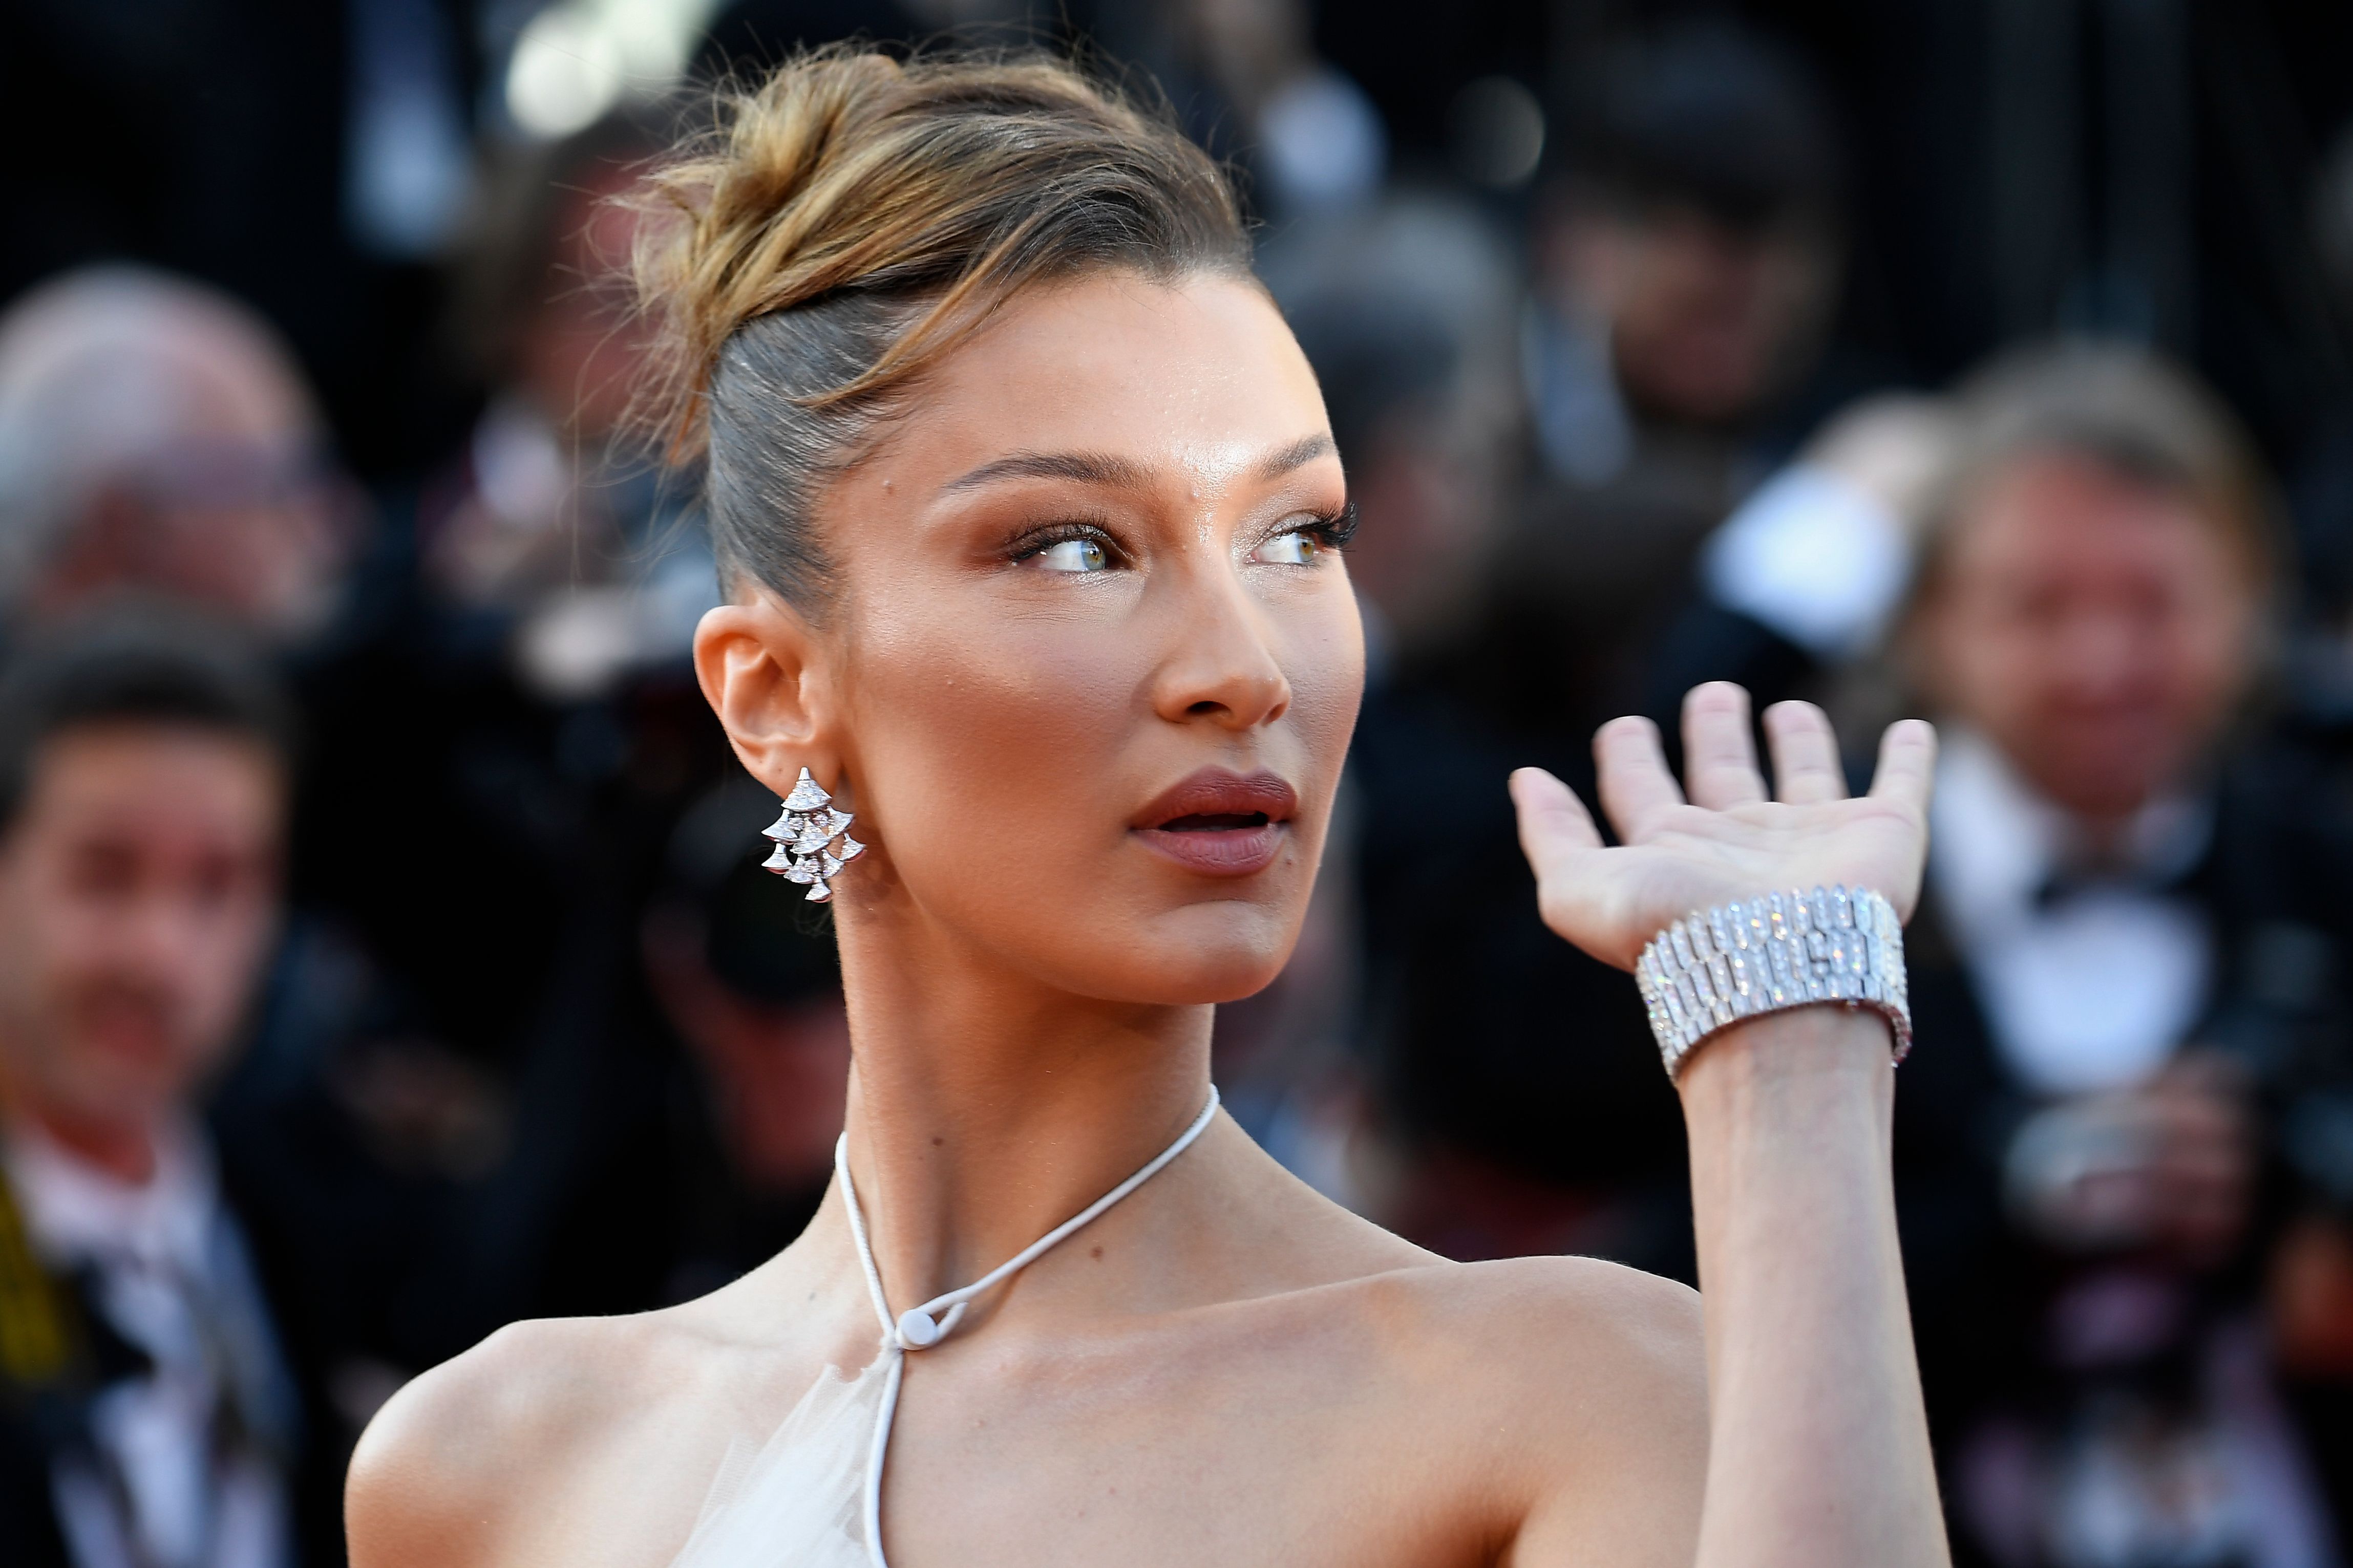 Bella Hadid is the most beautiful woman in the world, according to 'science'. FOX 5 San Diego